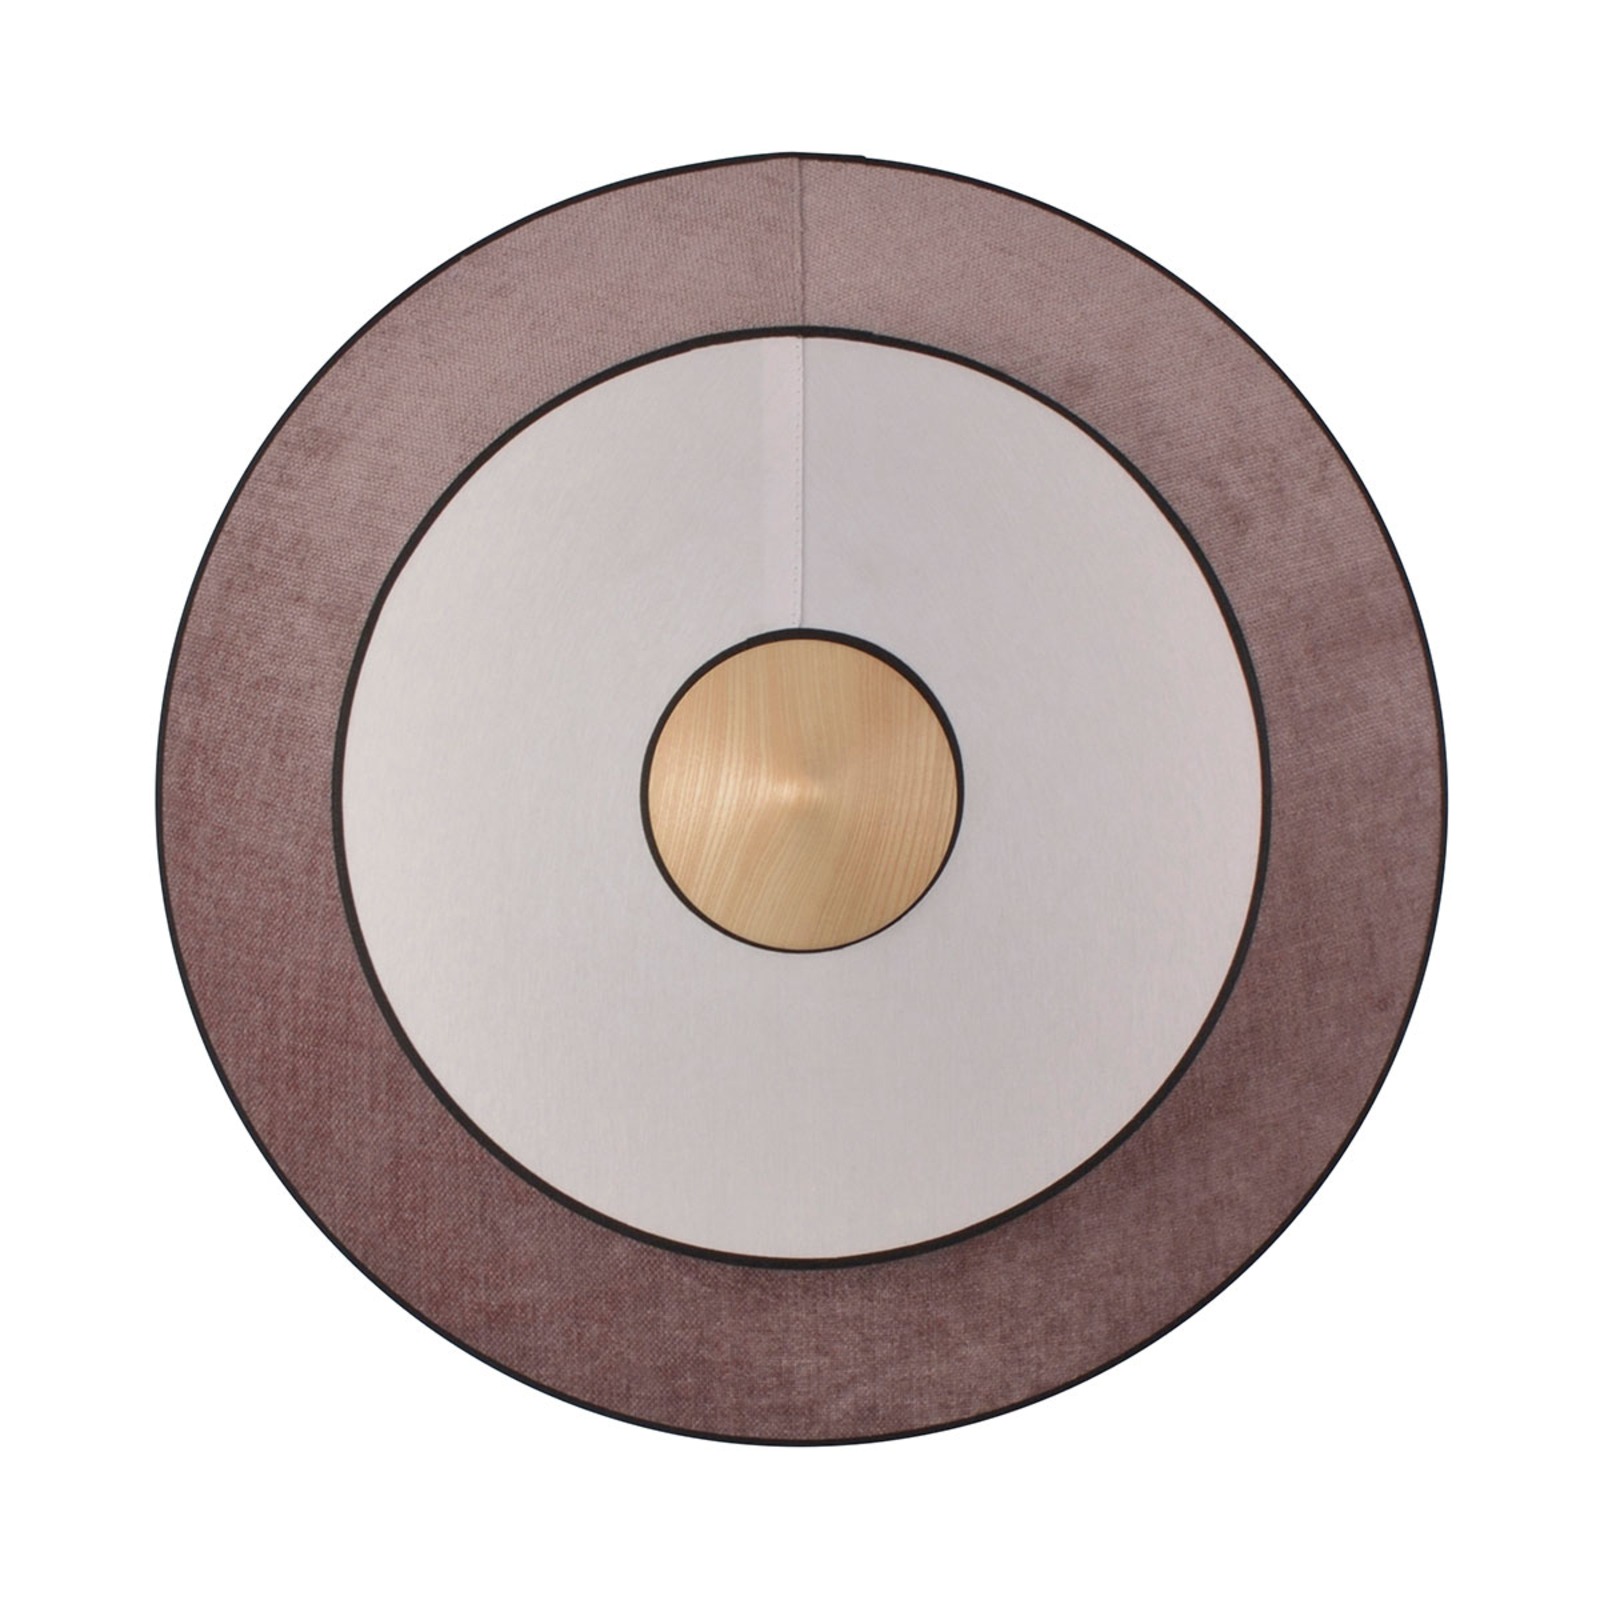 Forestier Cymbal S LED wall light, powder pink